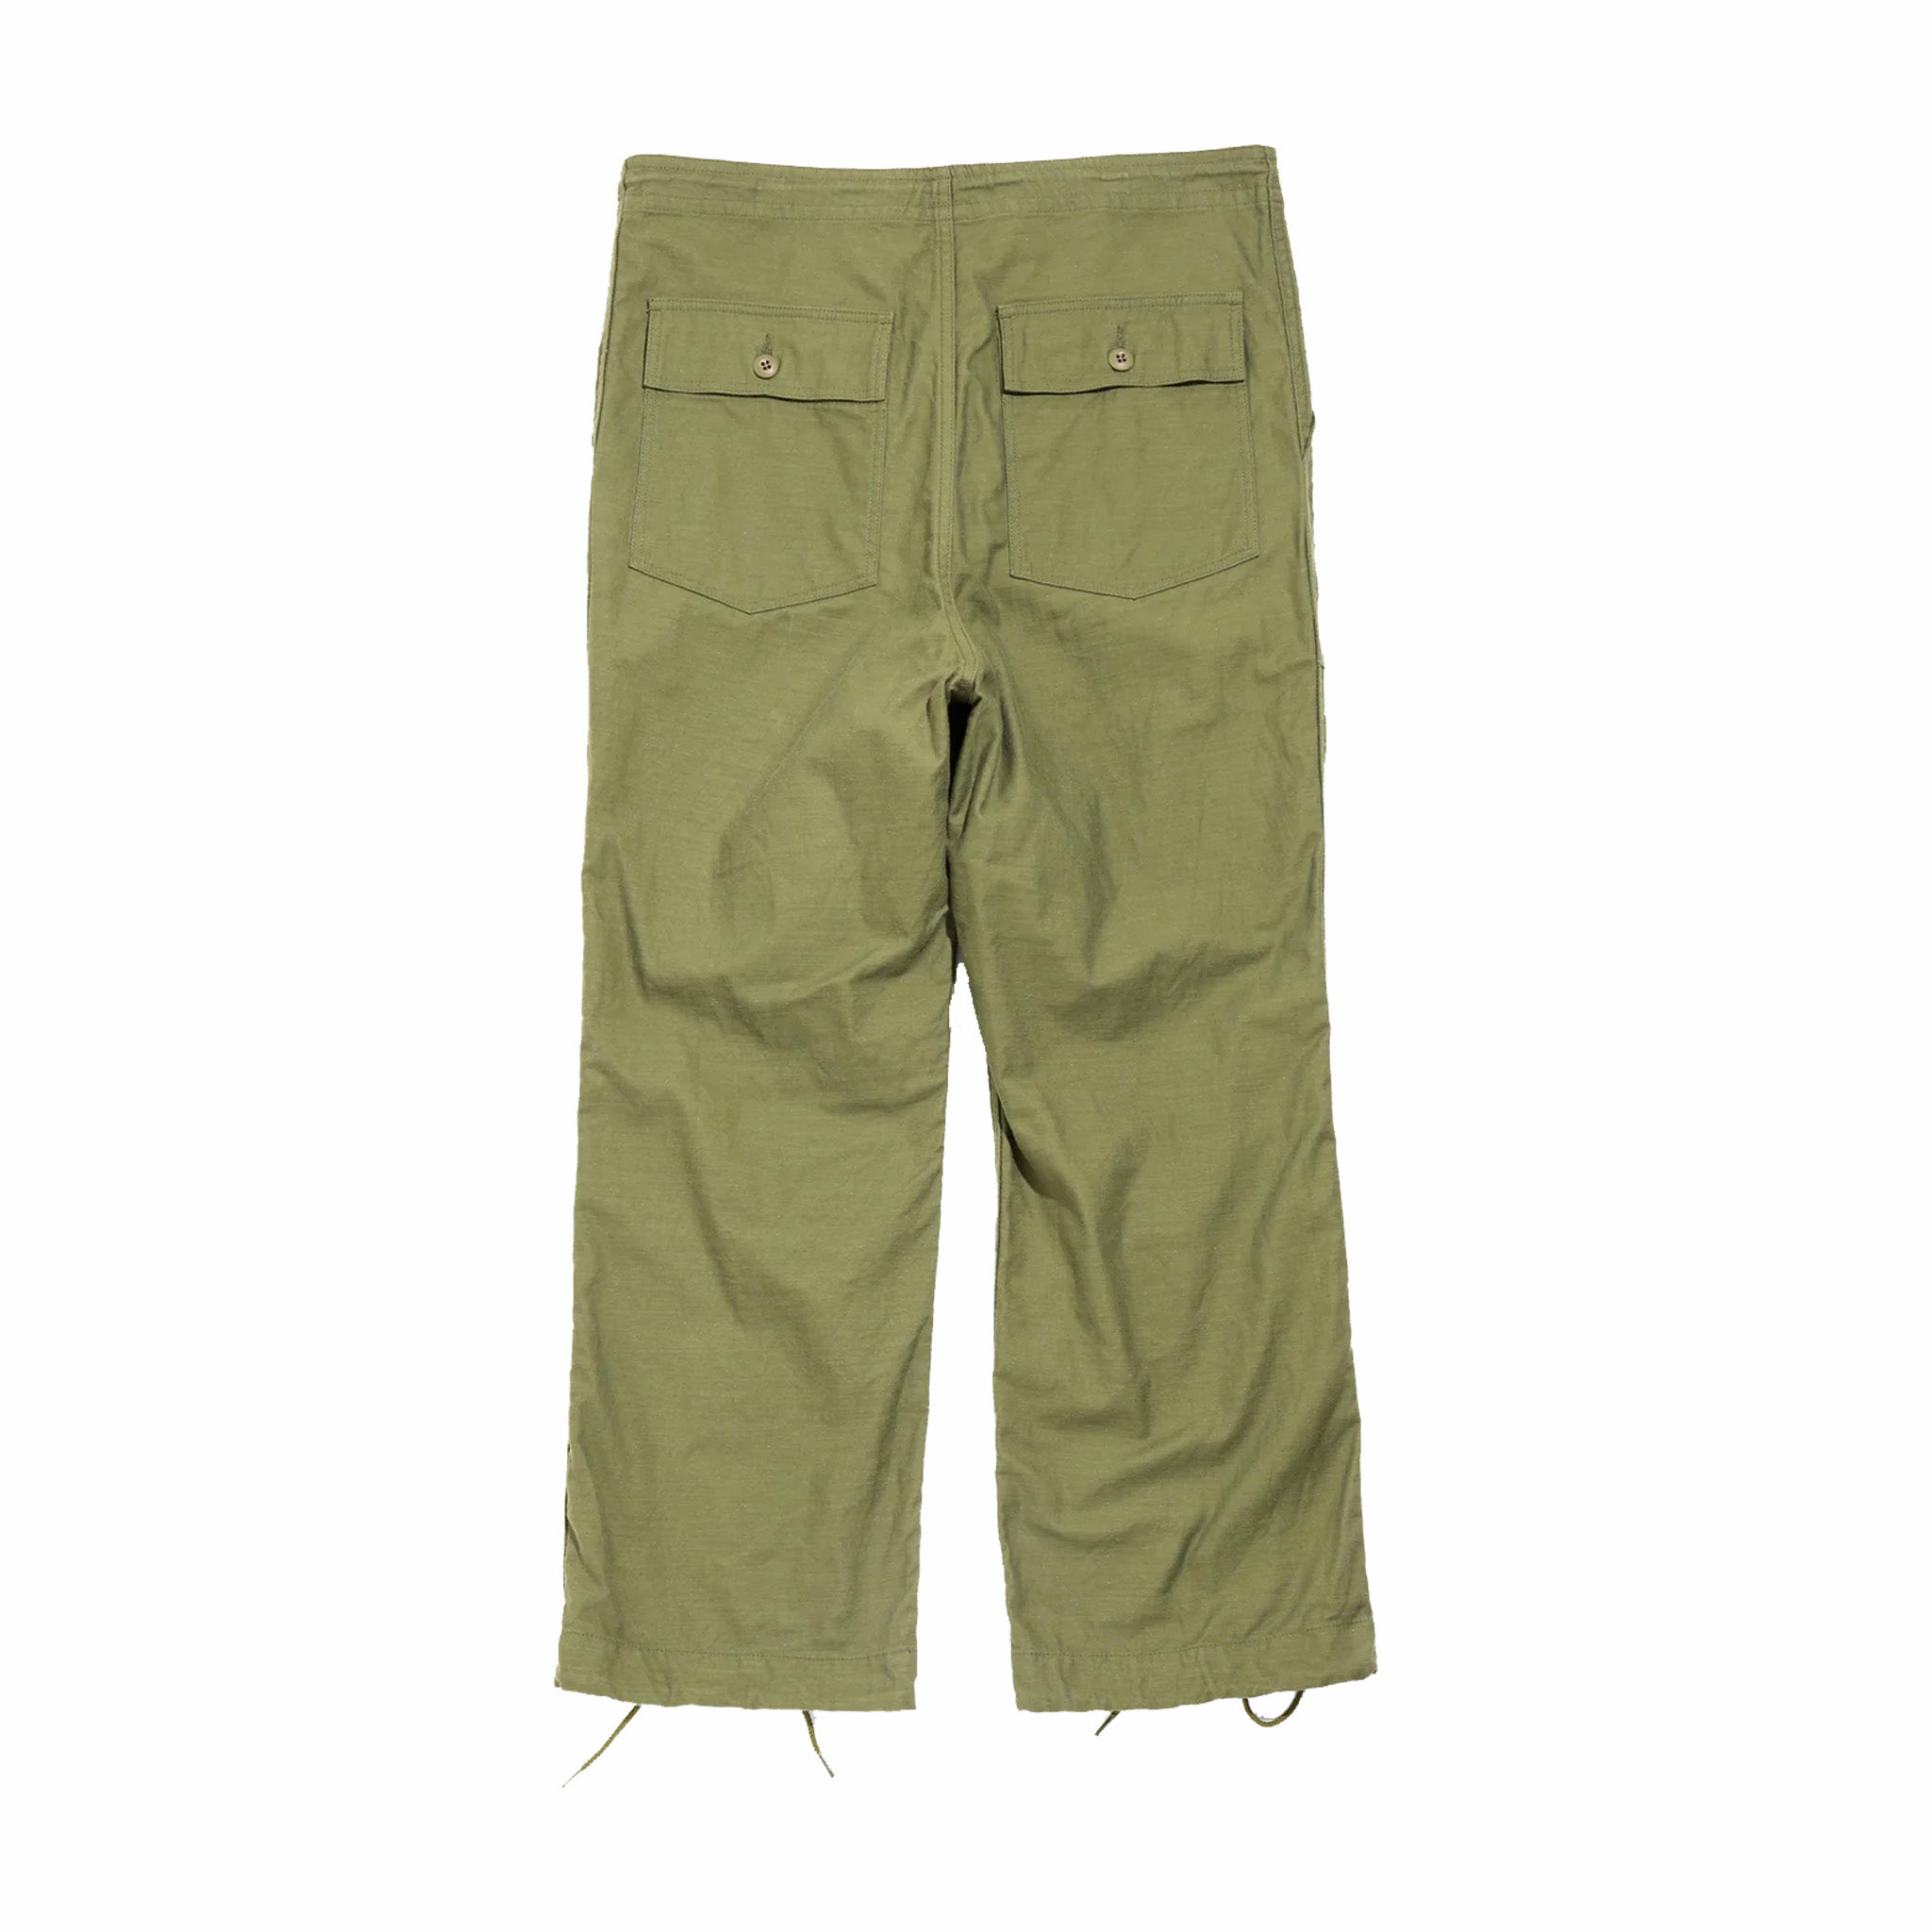 Needles String Fatigue Pant - Back Sateen (Olive) - August Shop